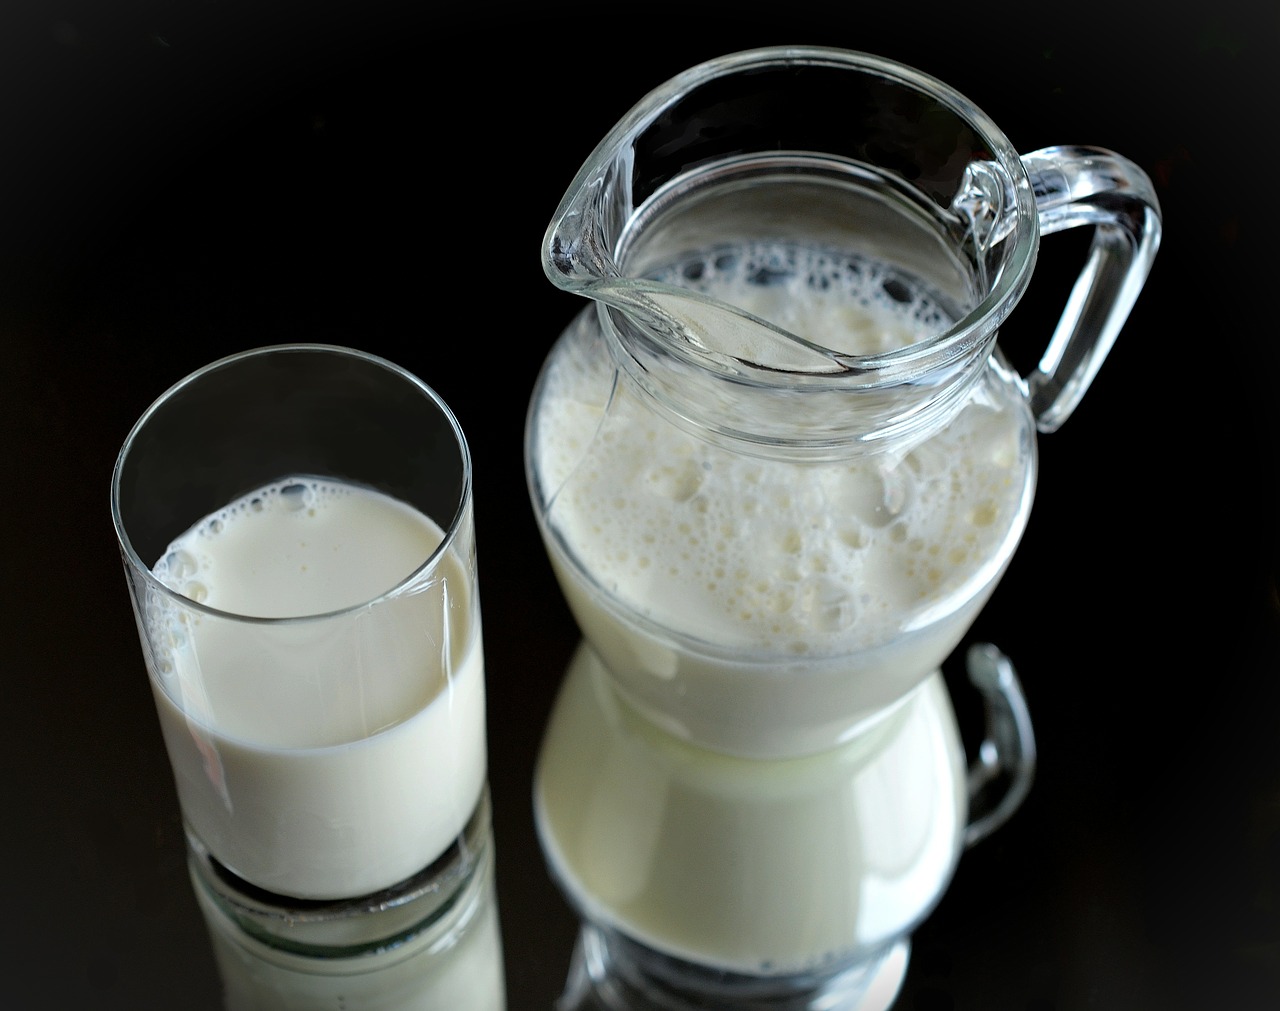 A glass of milk and a milk pitcher.